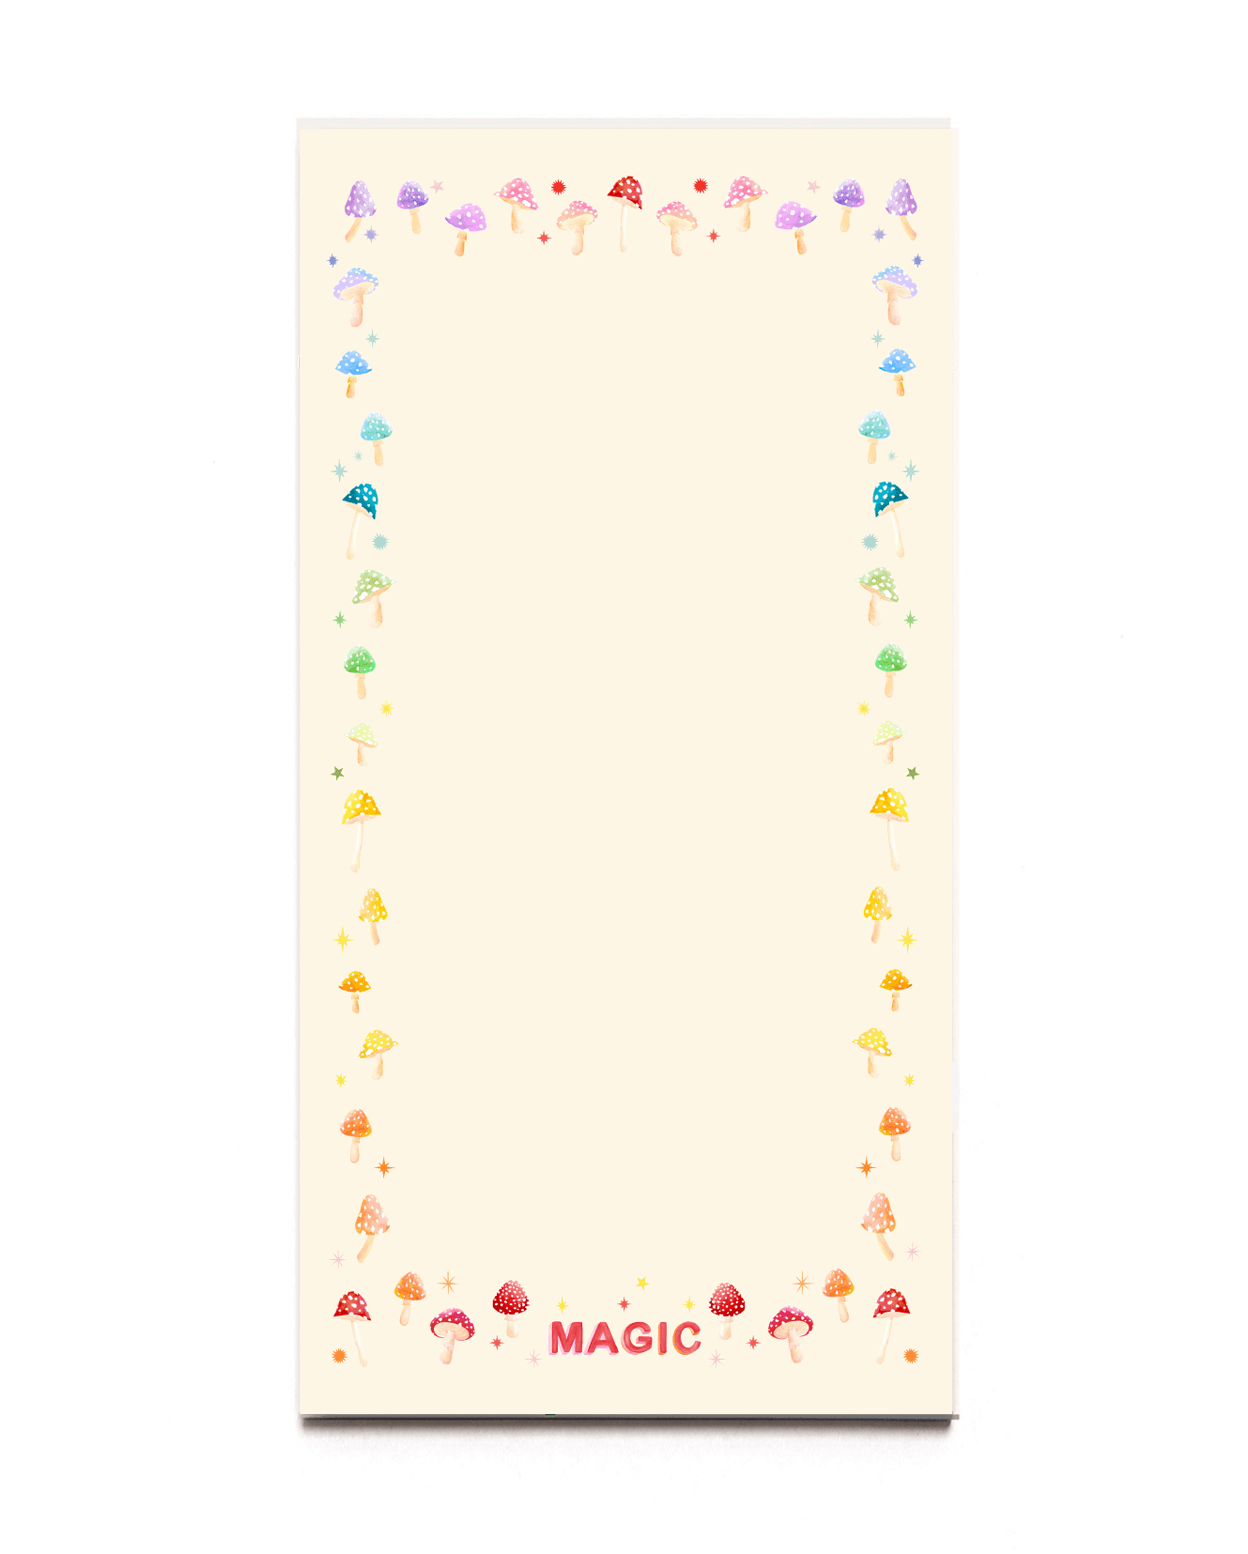 Rainbow colored magic mushrooms line each side of the notepad. Printed on cream colored paper.